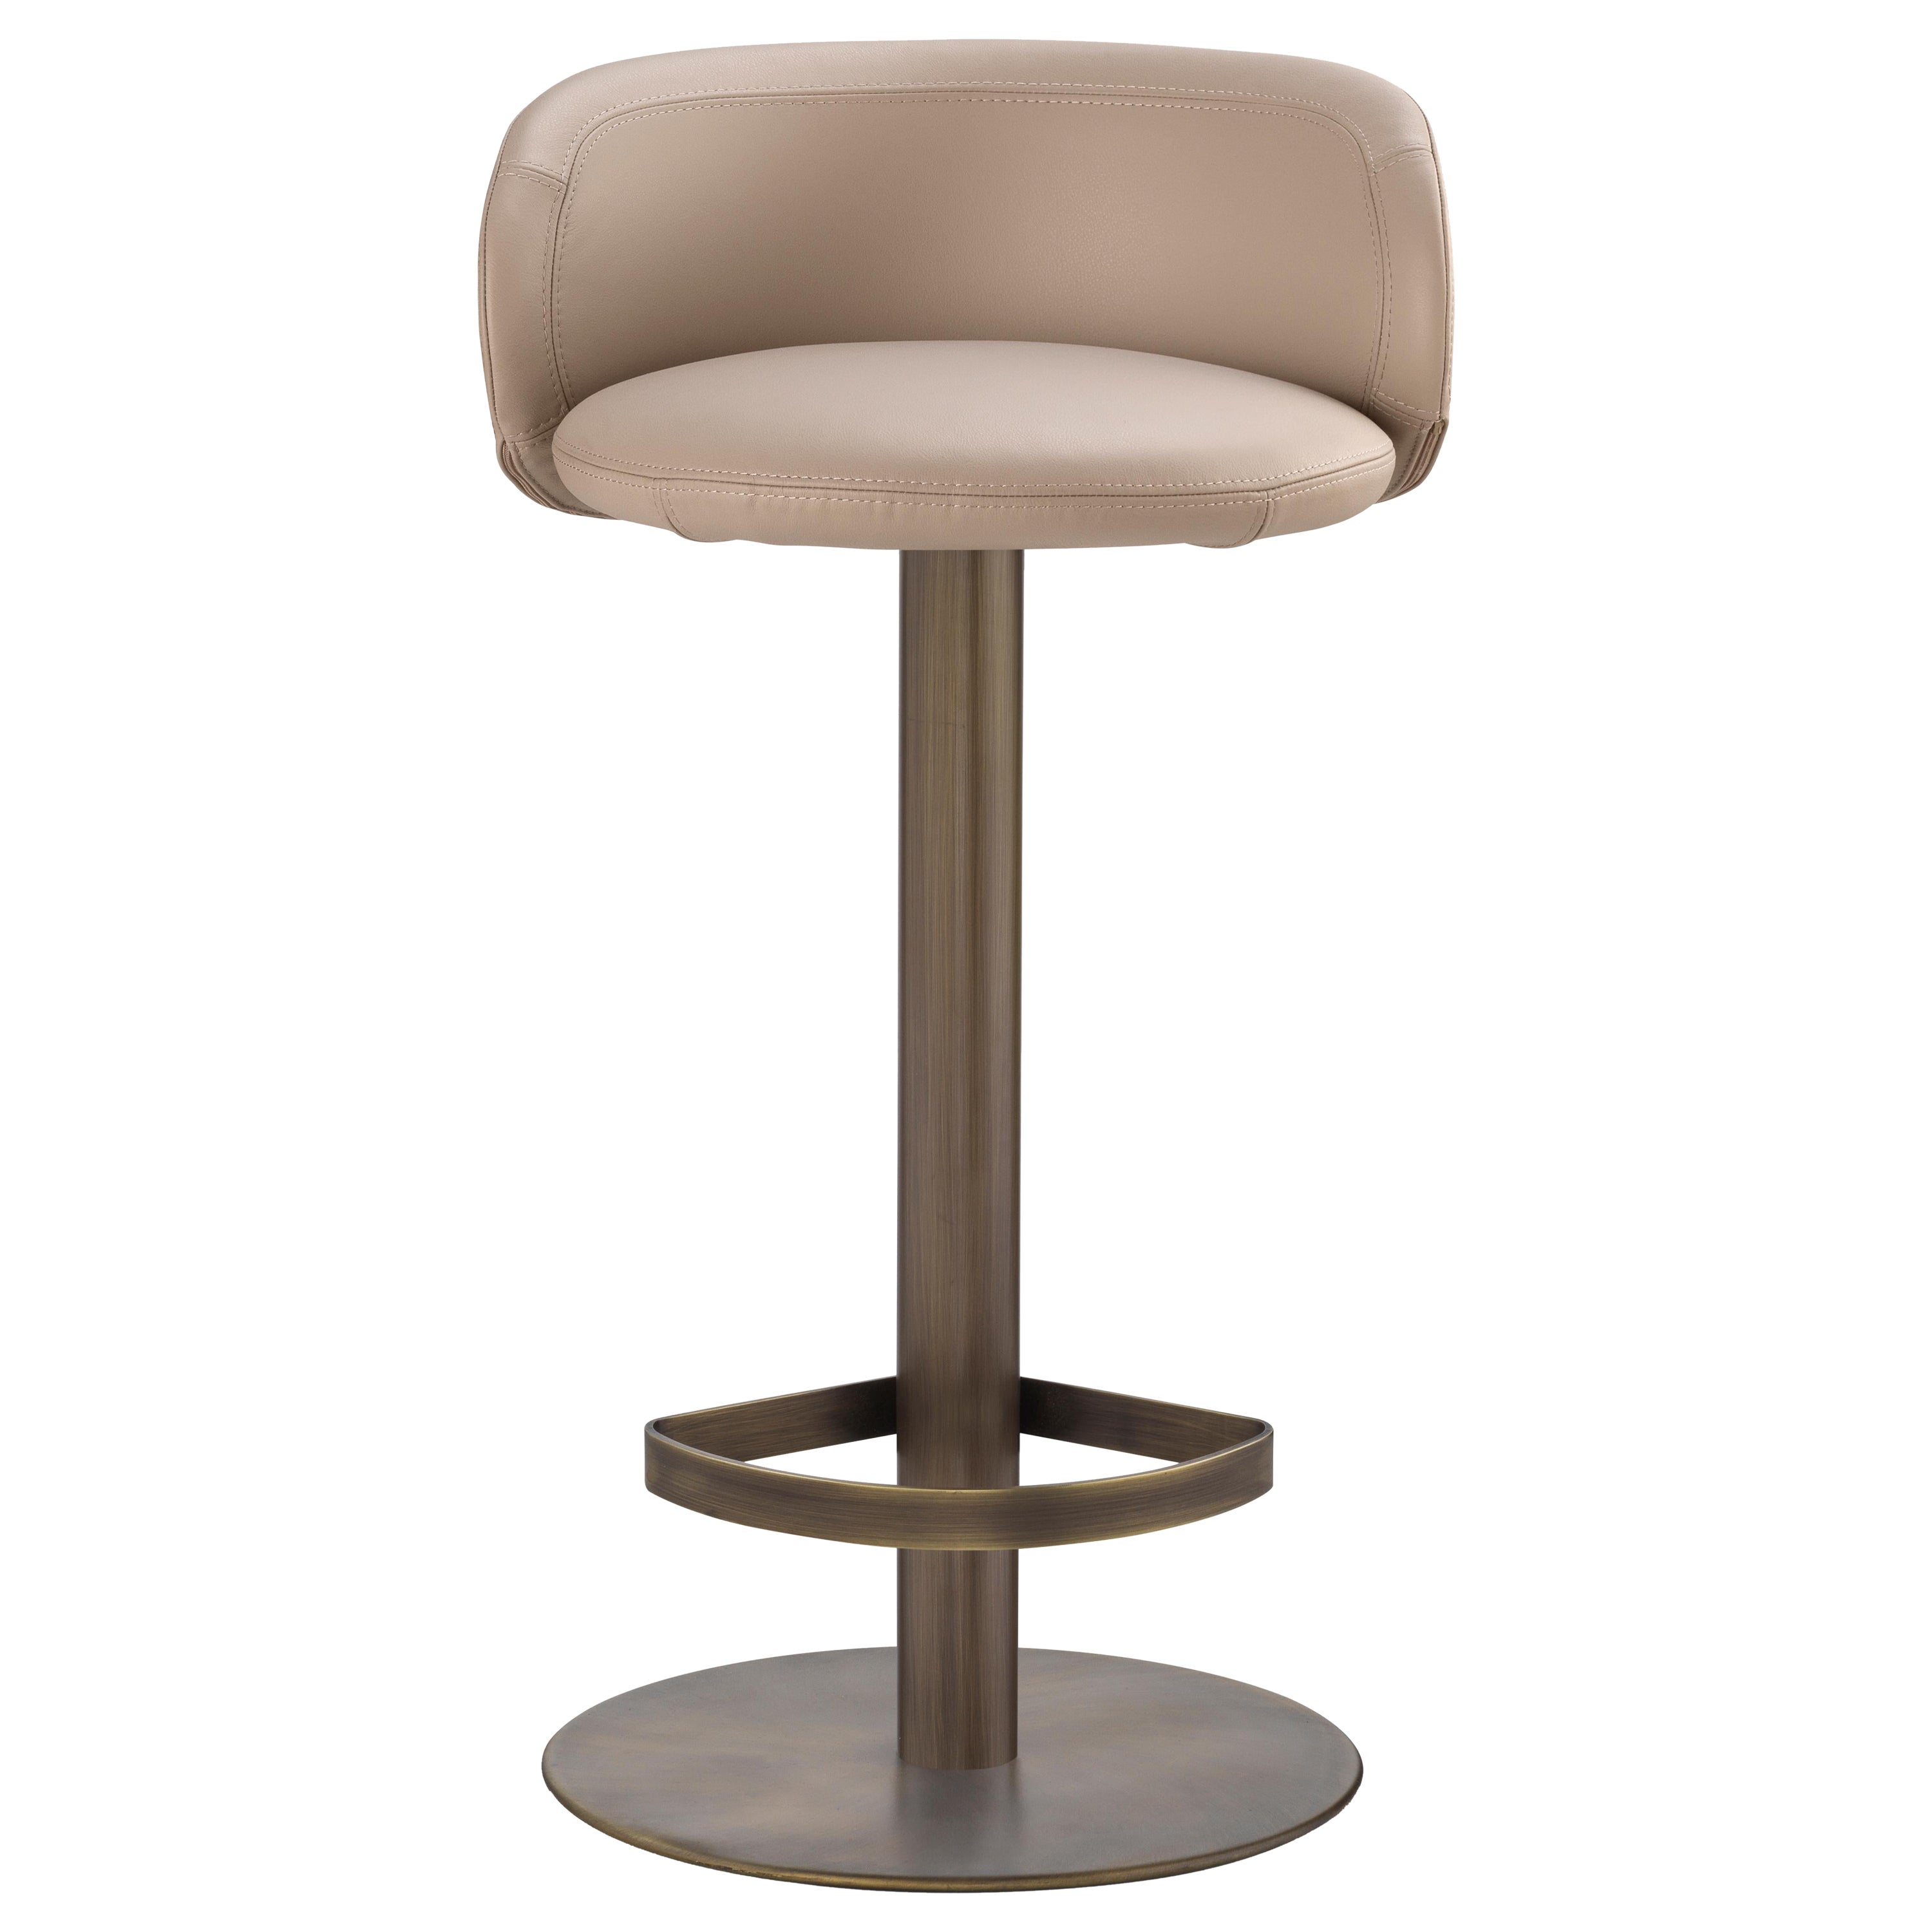 Hillary  Tabouret Cuir et laiton bruni  Structure, Made in Italy en vente